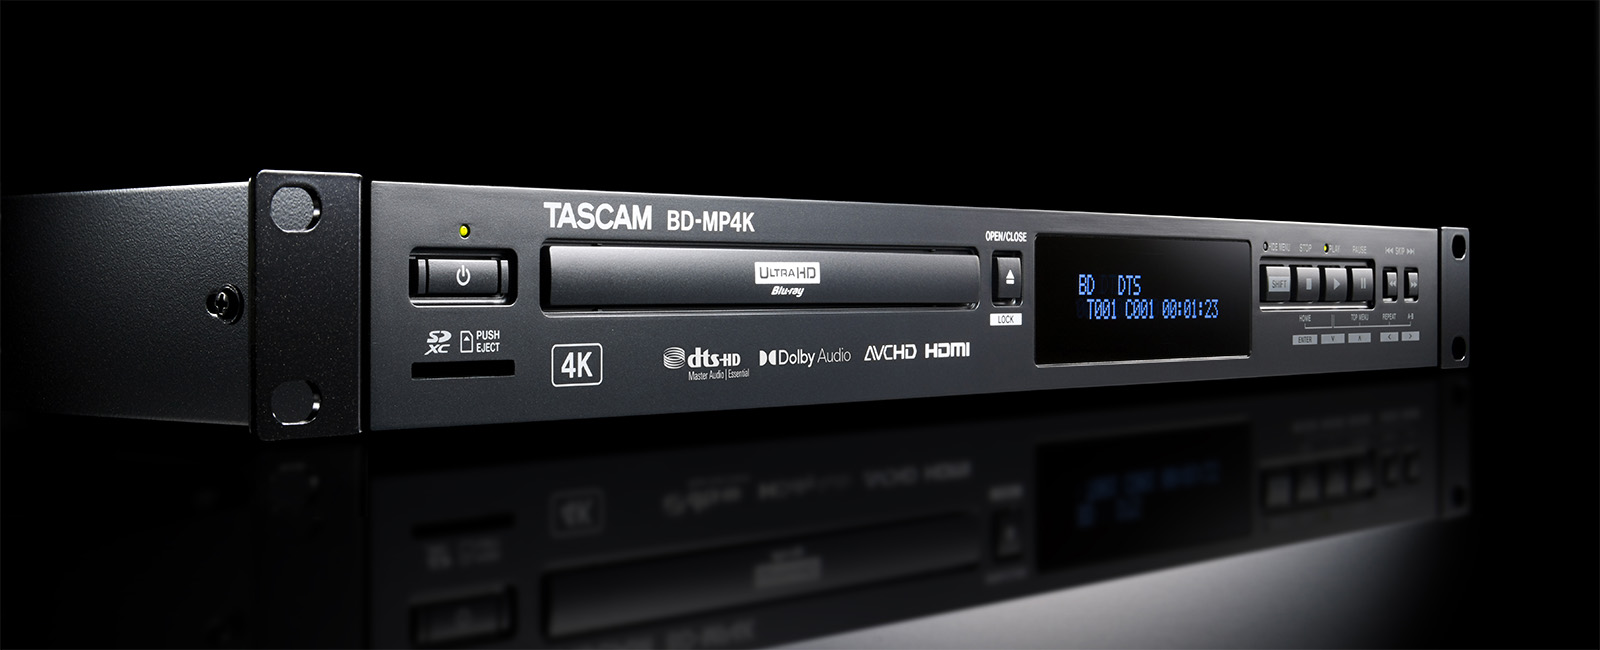 TASCAM Expands Professional Blu-ray Line with BD-MP4K Professional-Grade 4K UHD Blu-ray Player